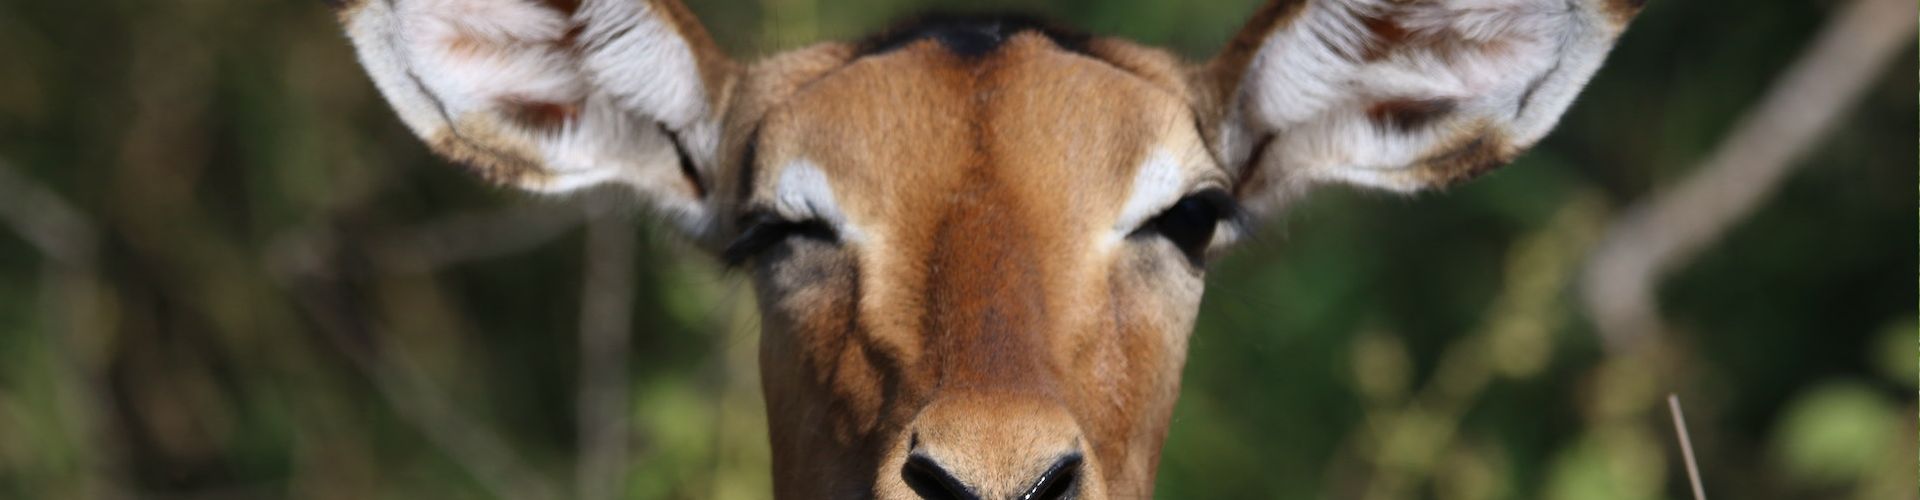 A picture of one of the many antelope species in Tanzania